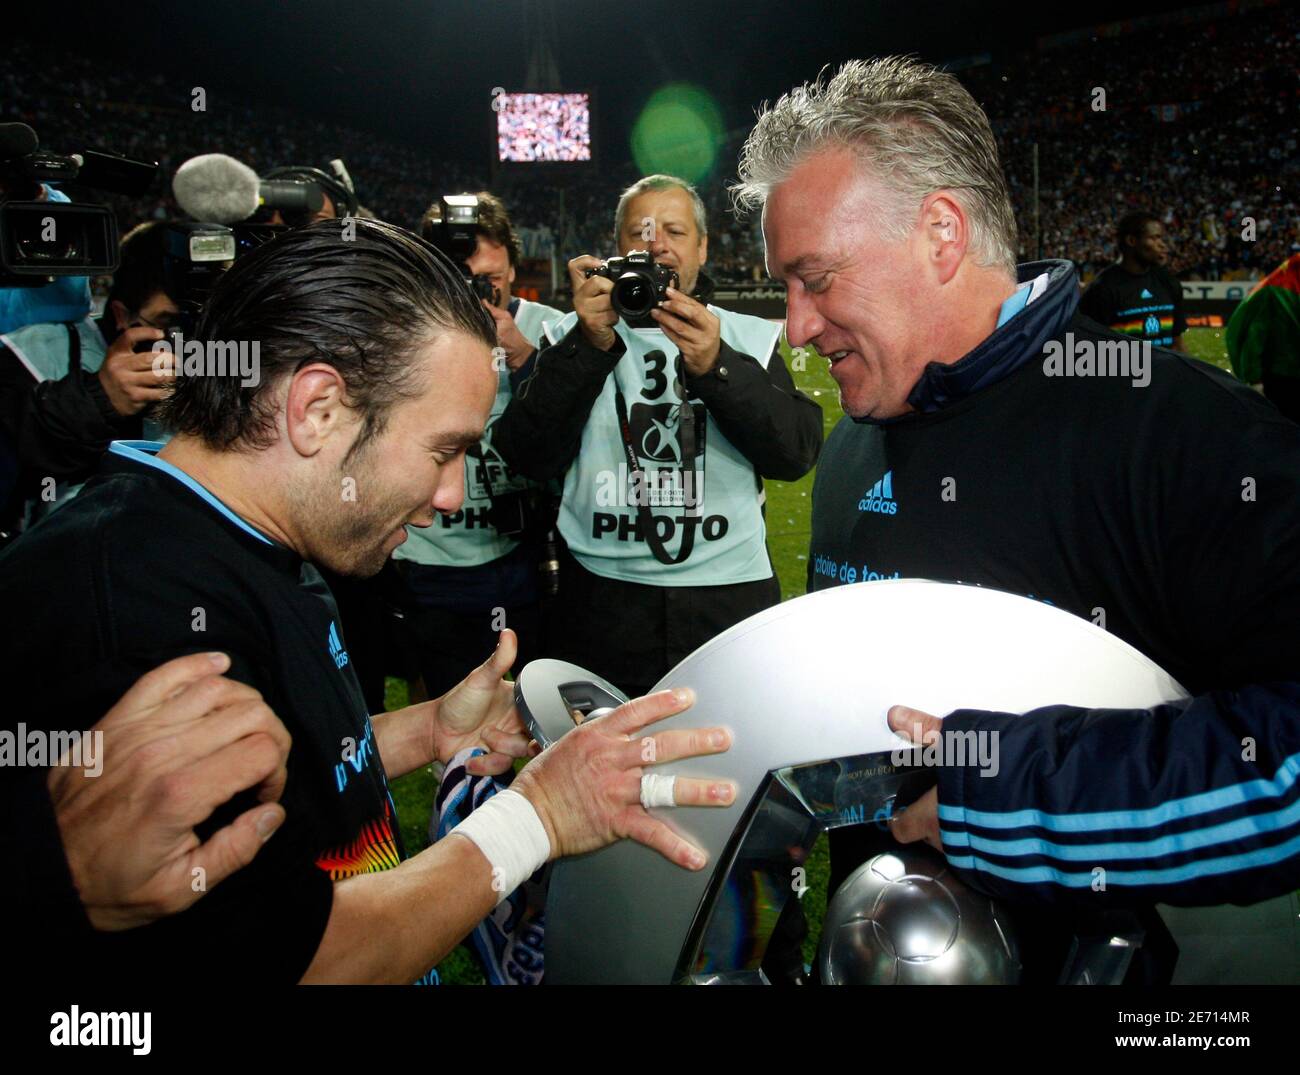 olympique-marseilles-coach-didier-deschamps-r-and-player-mathieu-valbuena-hold-up-the-french-championship-trophy-after-winning-their-ligue-1-title-at-the-velodrome-stadium-in-marseille-may15-2010-reutersphilippe-laurenson-france-tags-sport-soccer-2E714MR.jpg